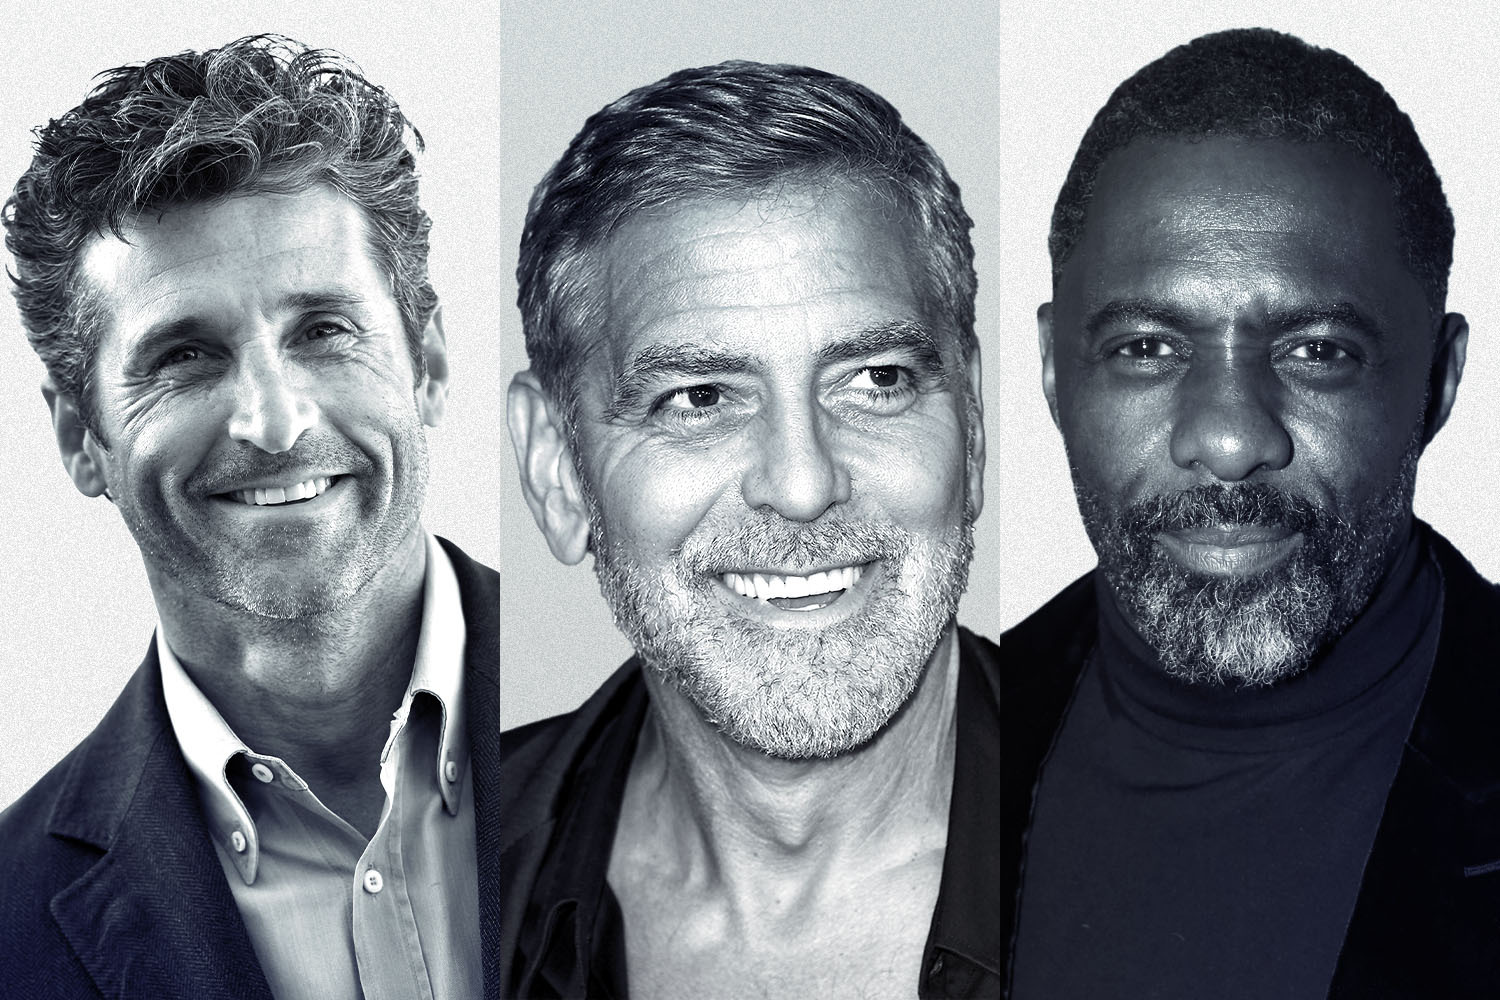 Black and white photos of Patrick Dempsey, George Clooney and Idris Elba